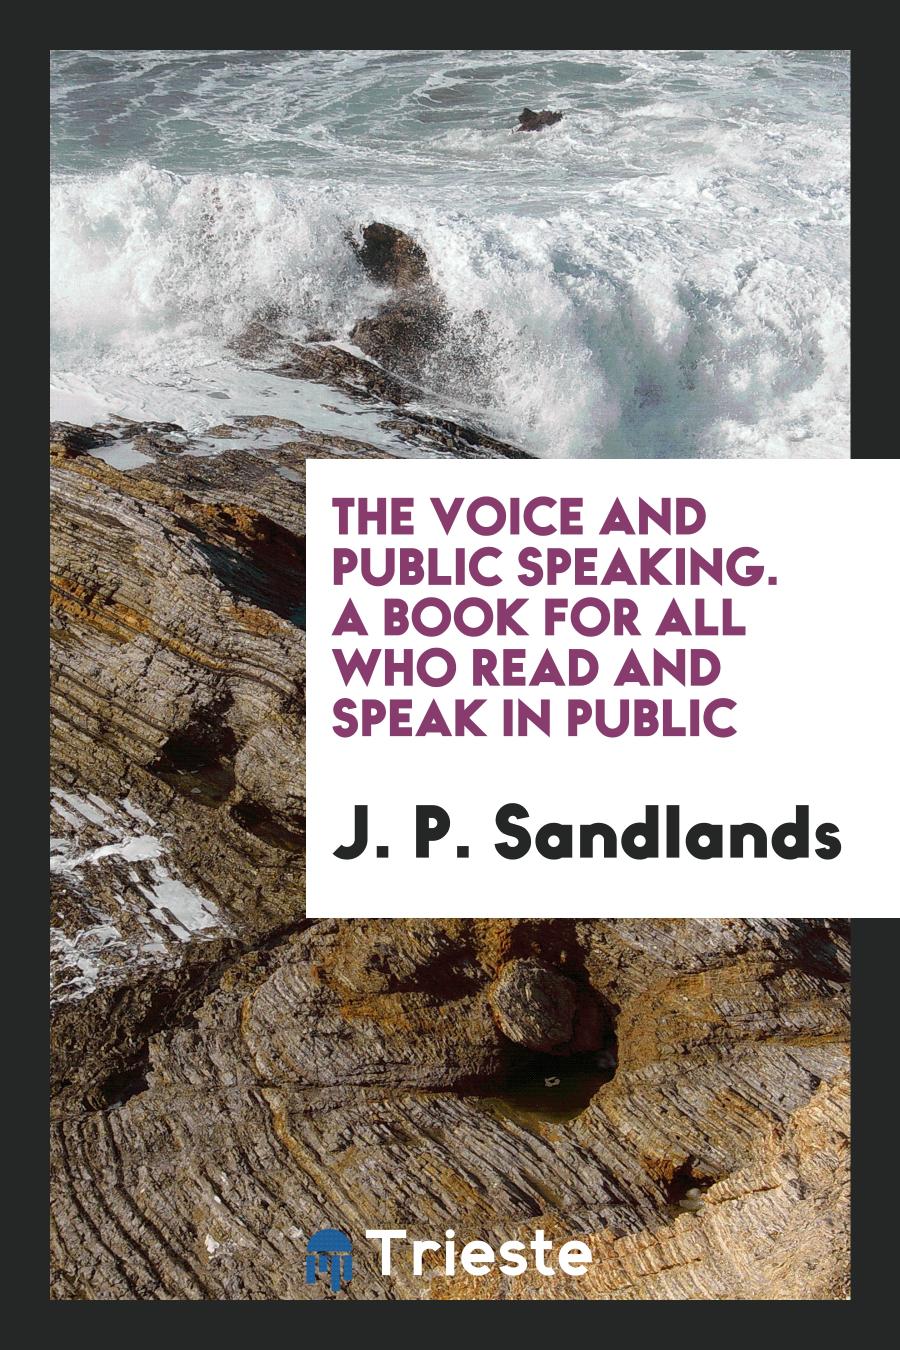 The Voice and Public Speaking. A Book for All Who Read and Speak in Public